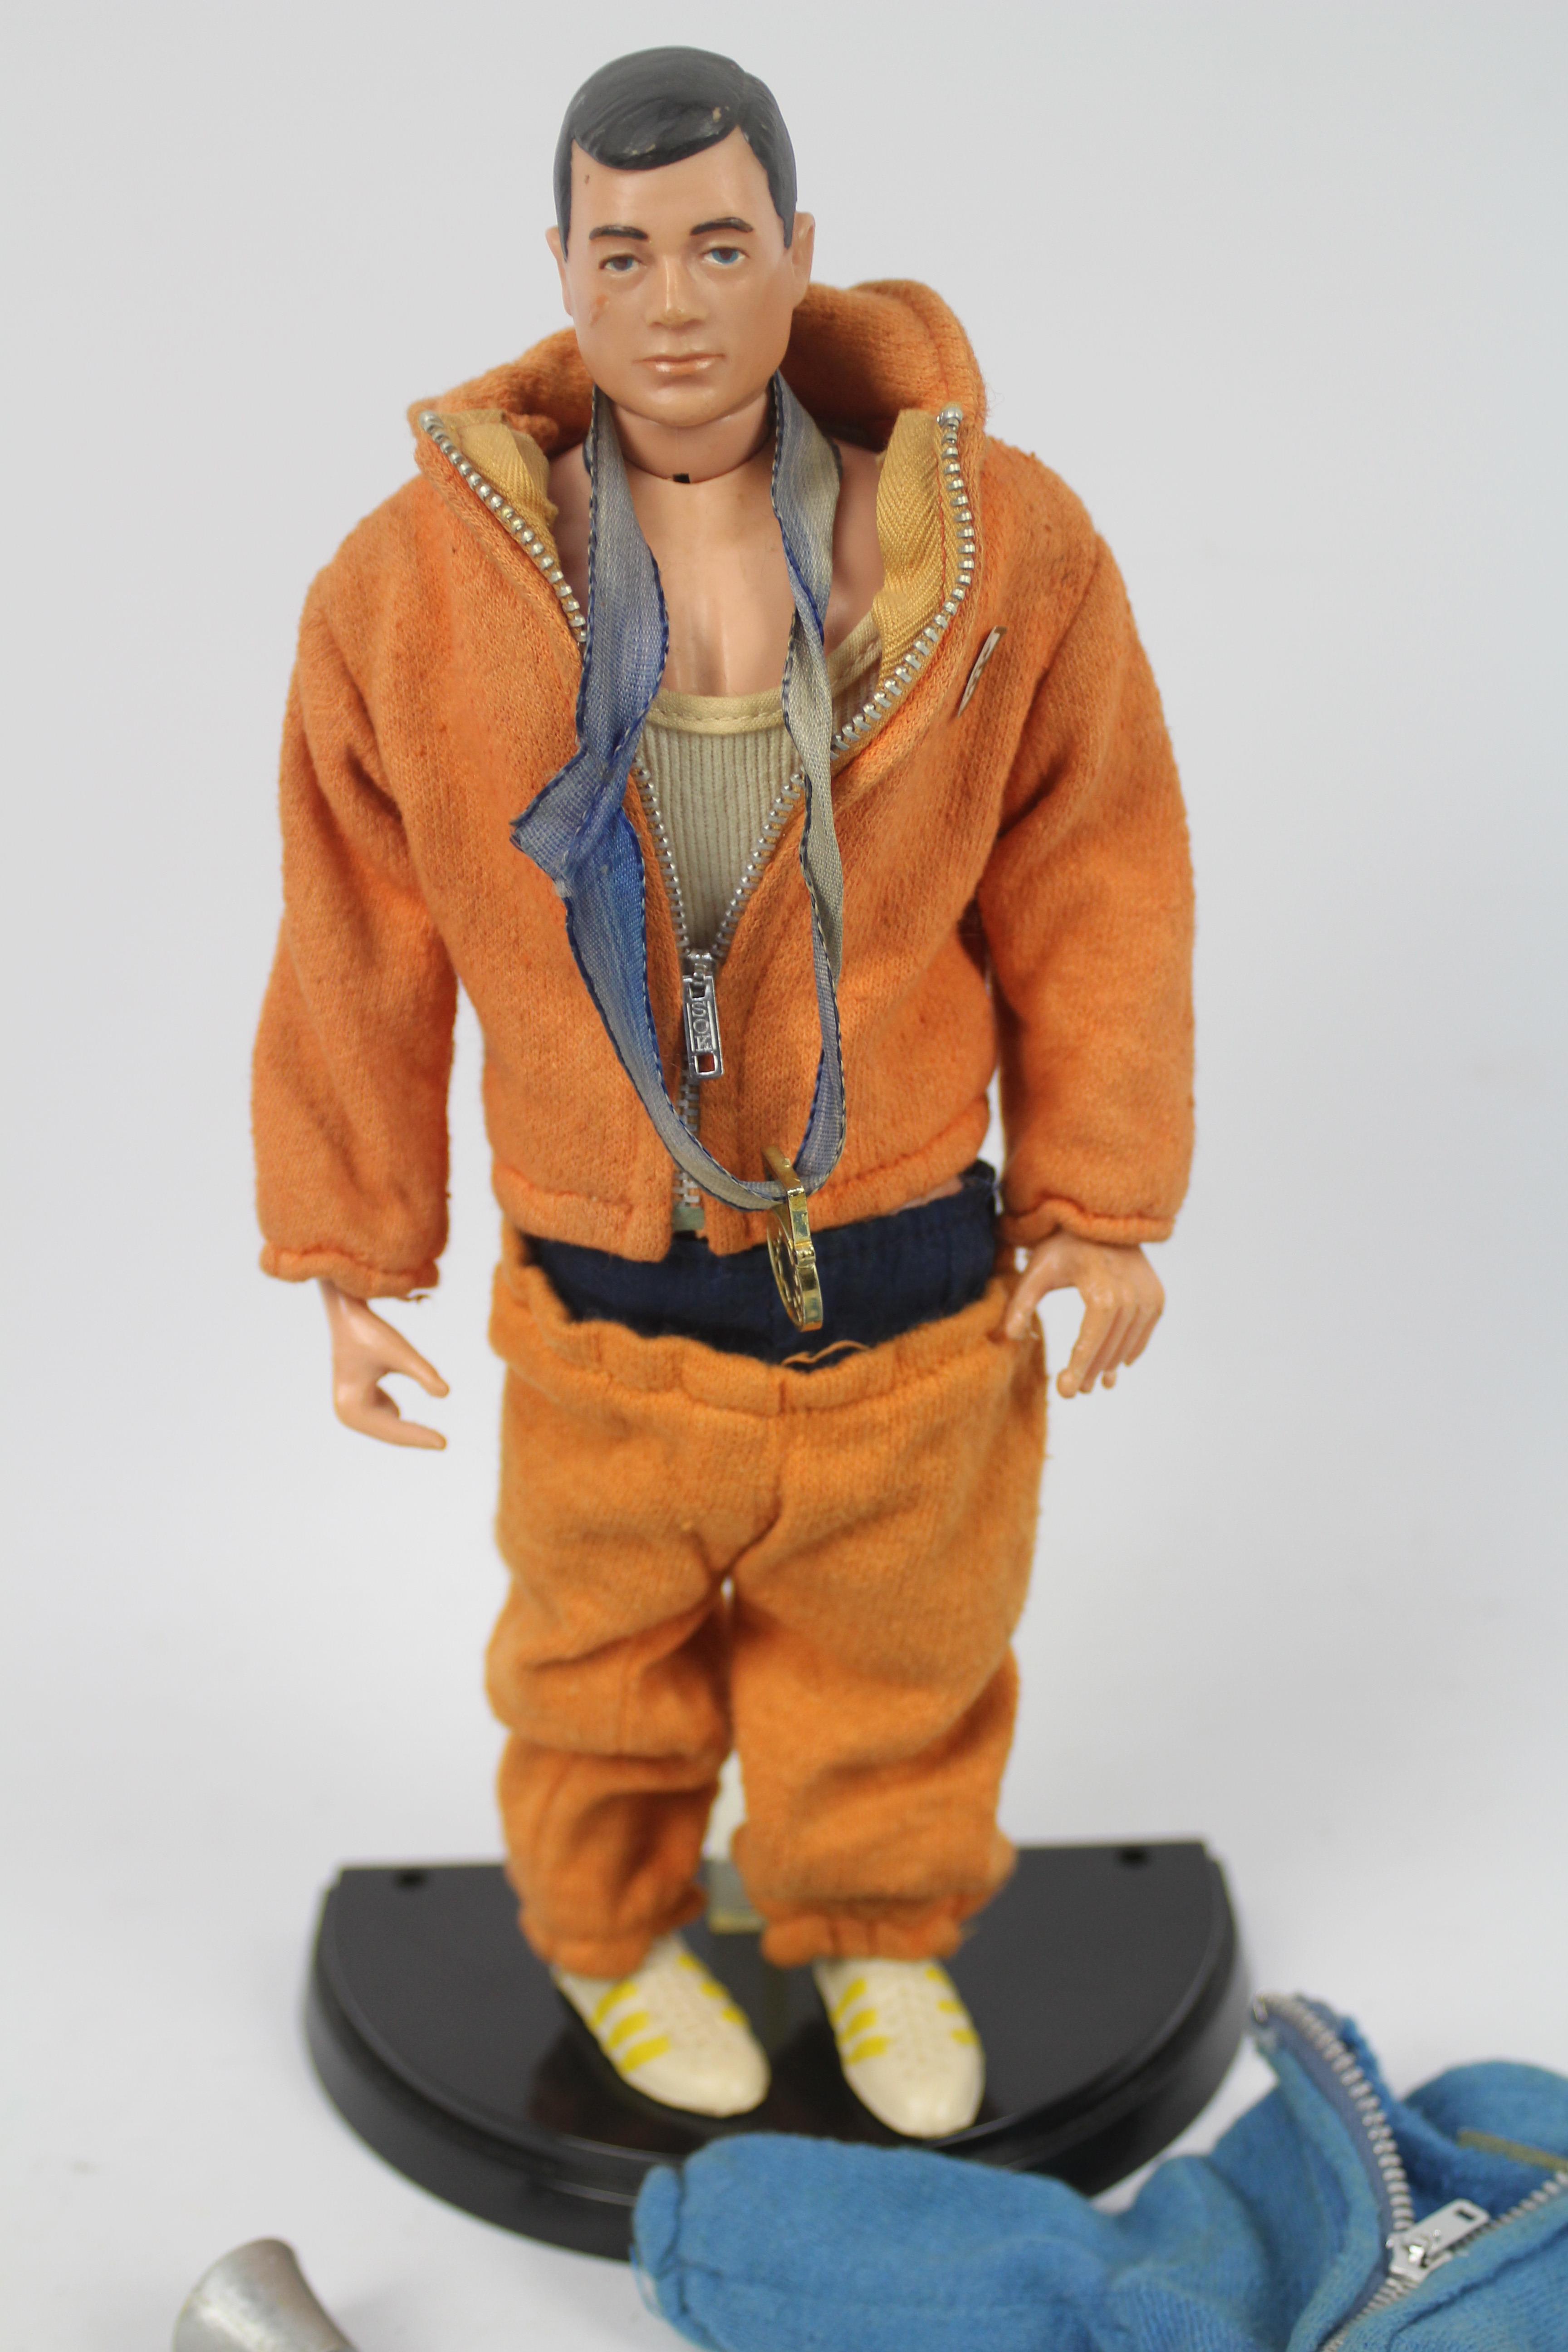 Palitoy - Action Man - A vintage unboxed Palitoy Action Man Olympic Champion figure. - Image 2 of 7